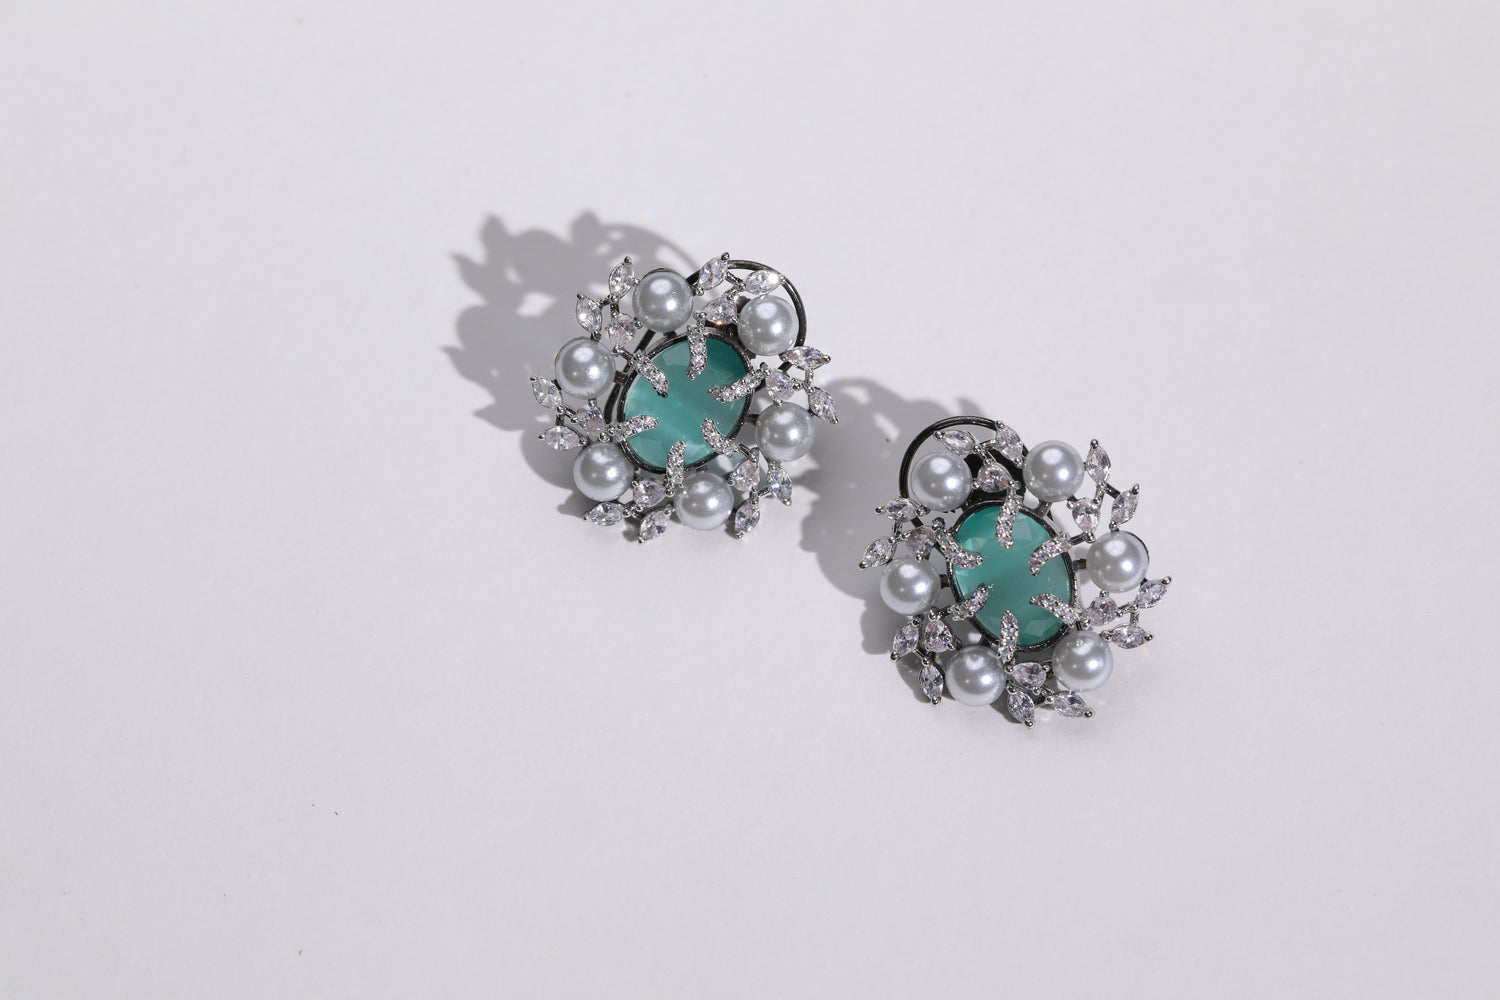 Timeless Emerald Accessories: Add a touch of sophistication to your outfit with these versatile earrings